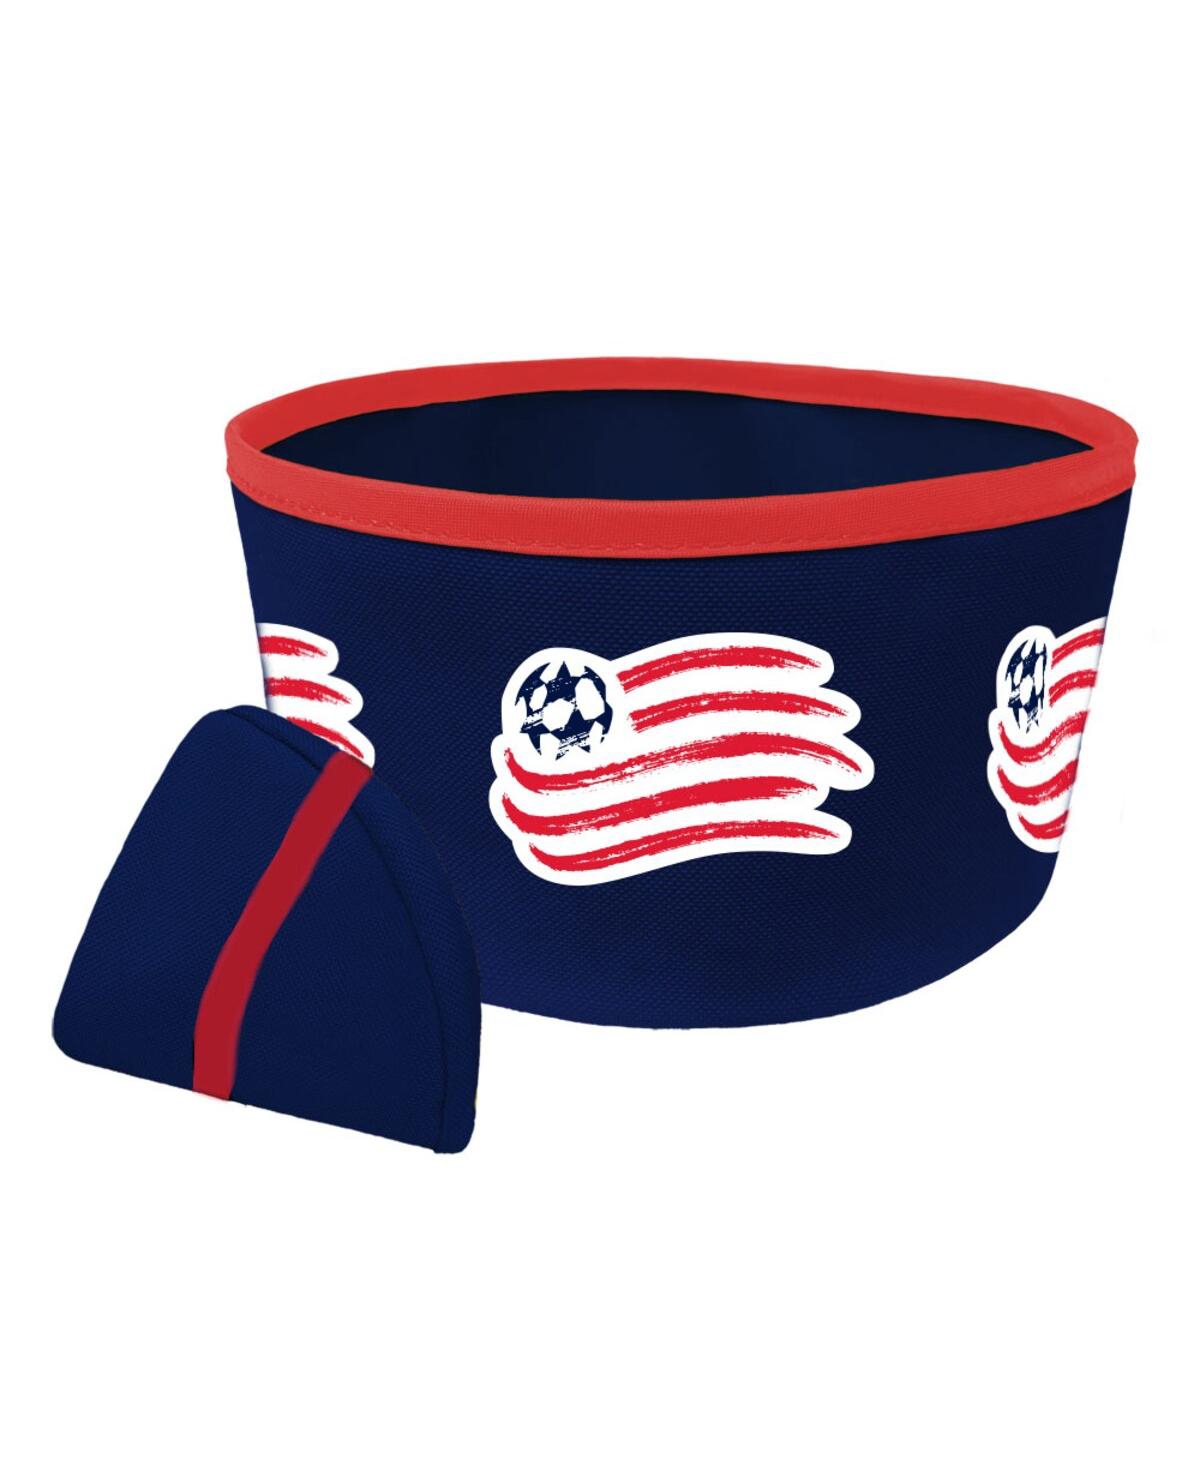 New England Revolution Collapsible Travel Dog Bowl - Red